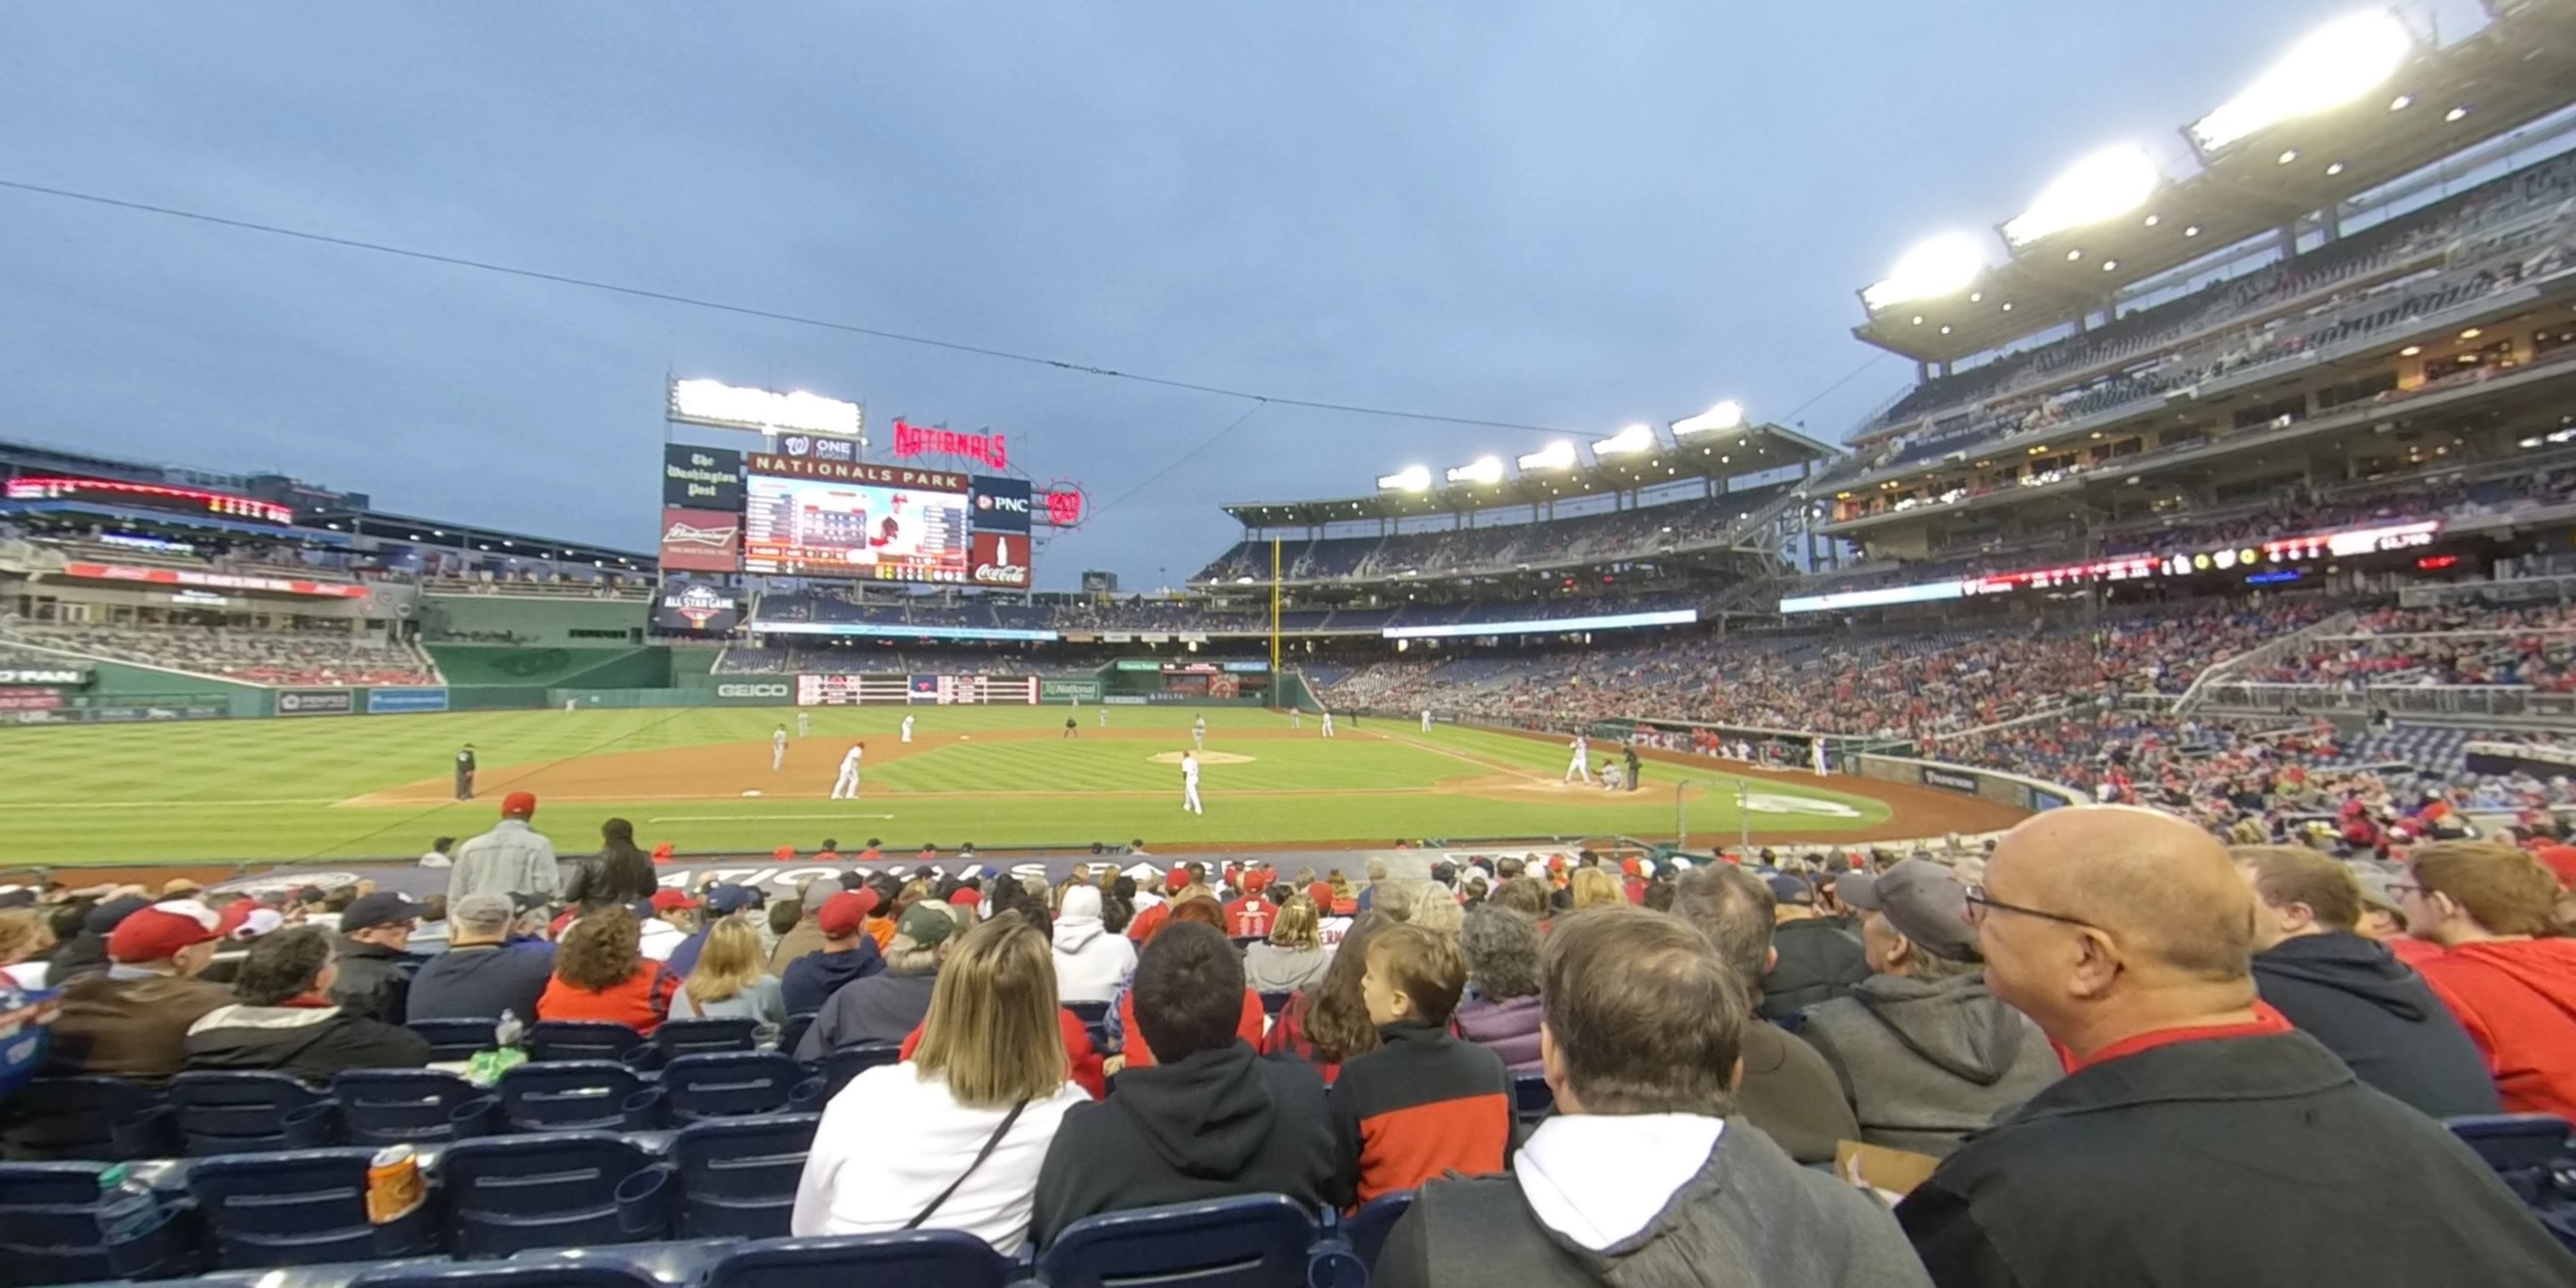 section 117 panoramic seat view  for baseball - nationals park